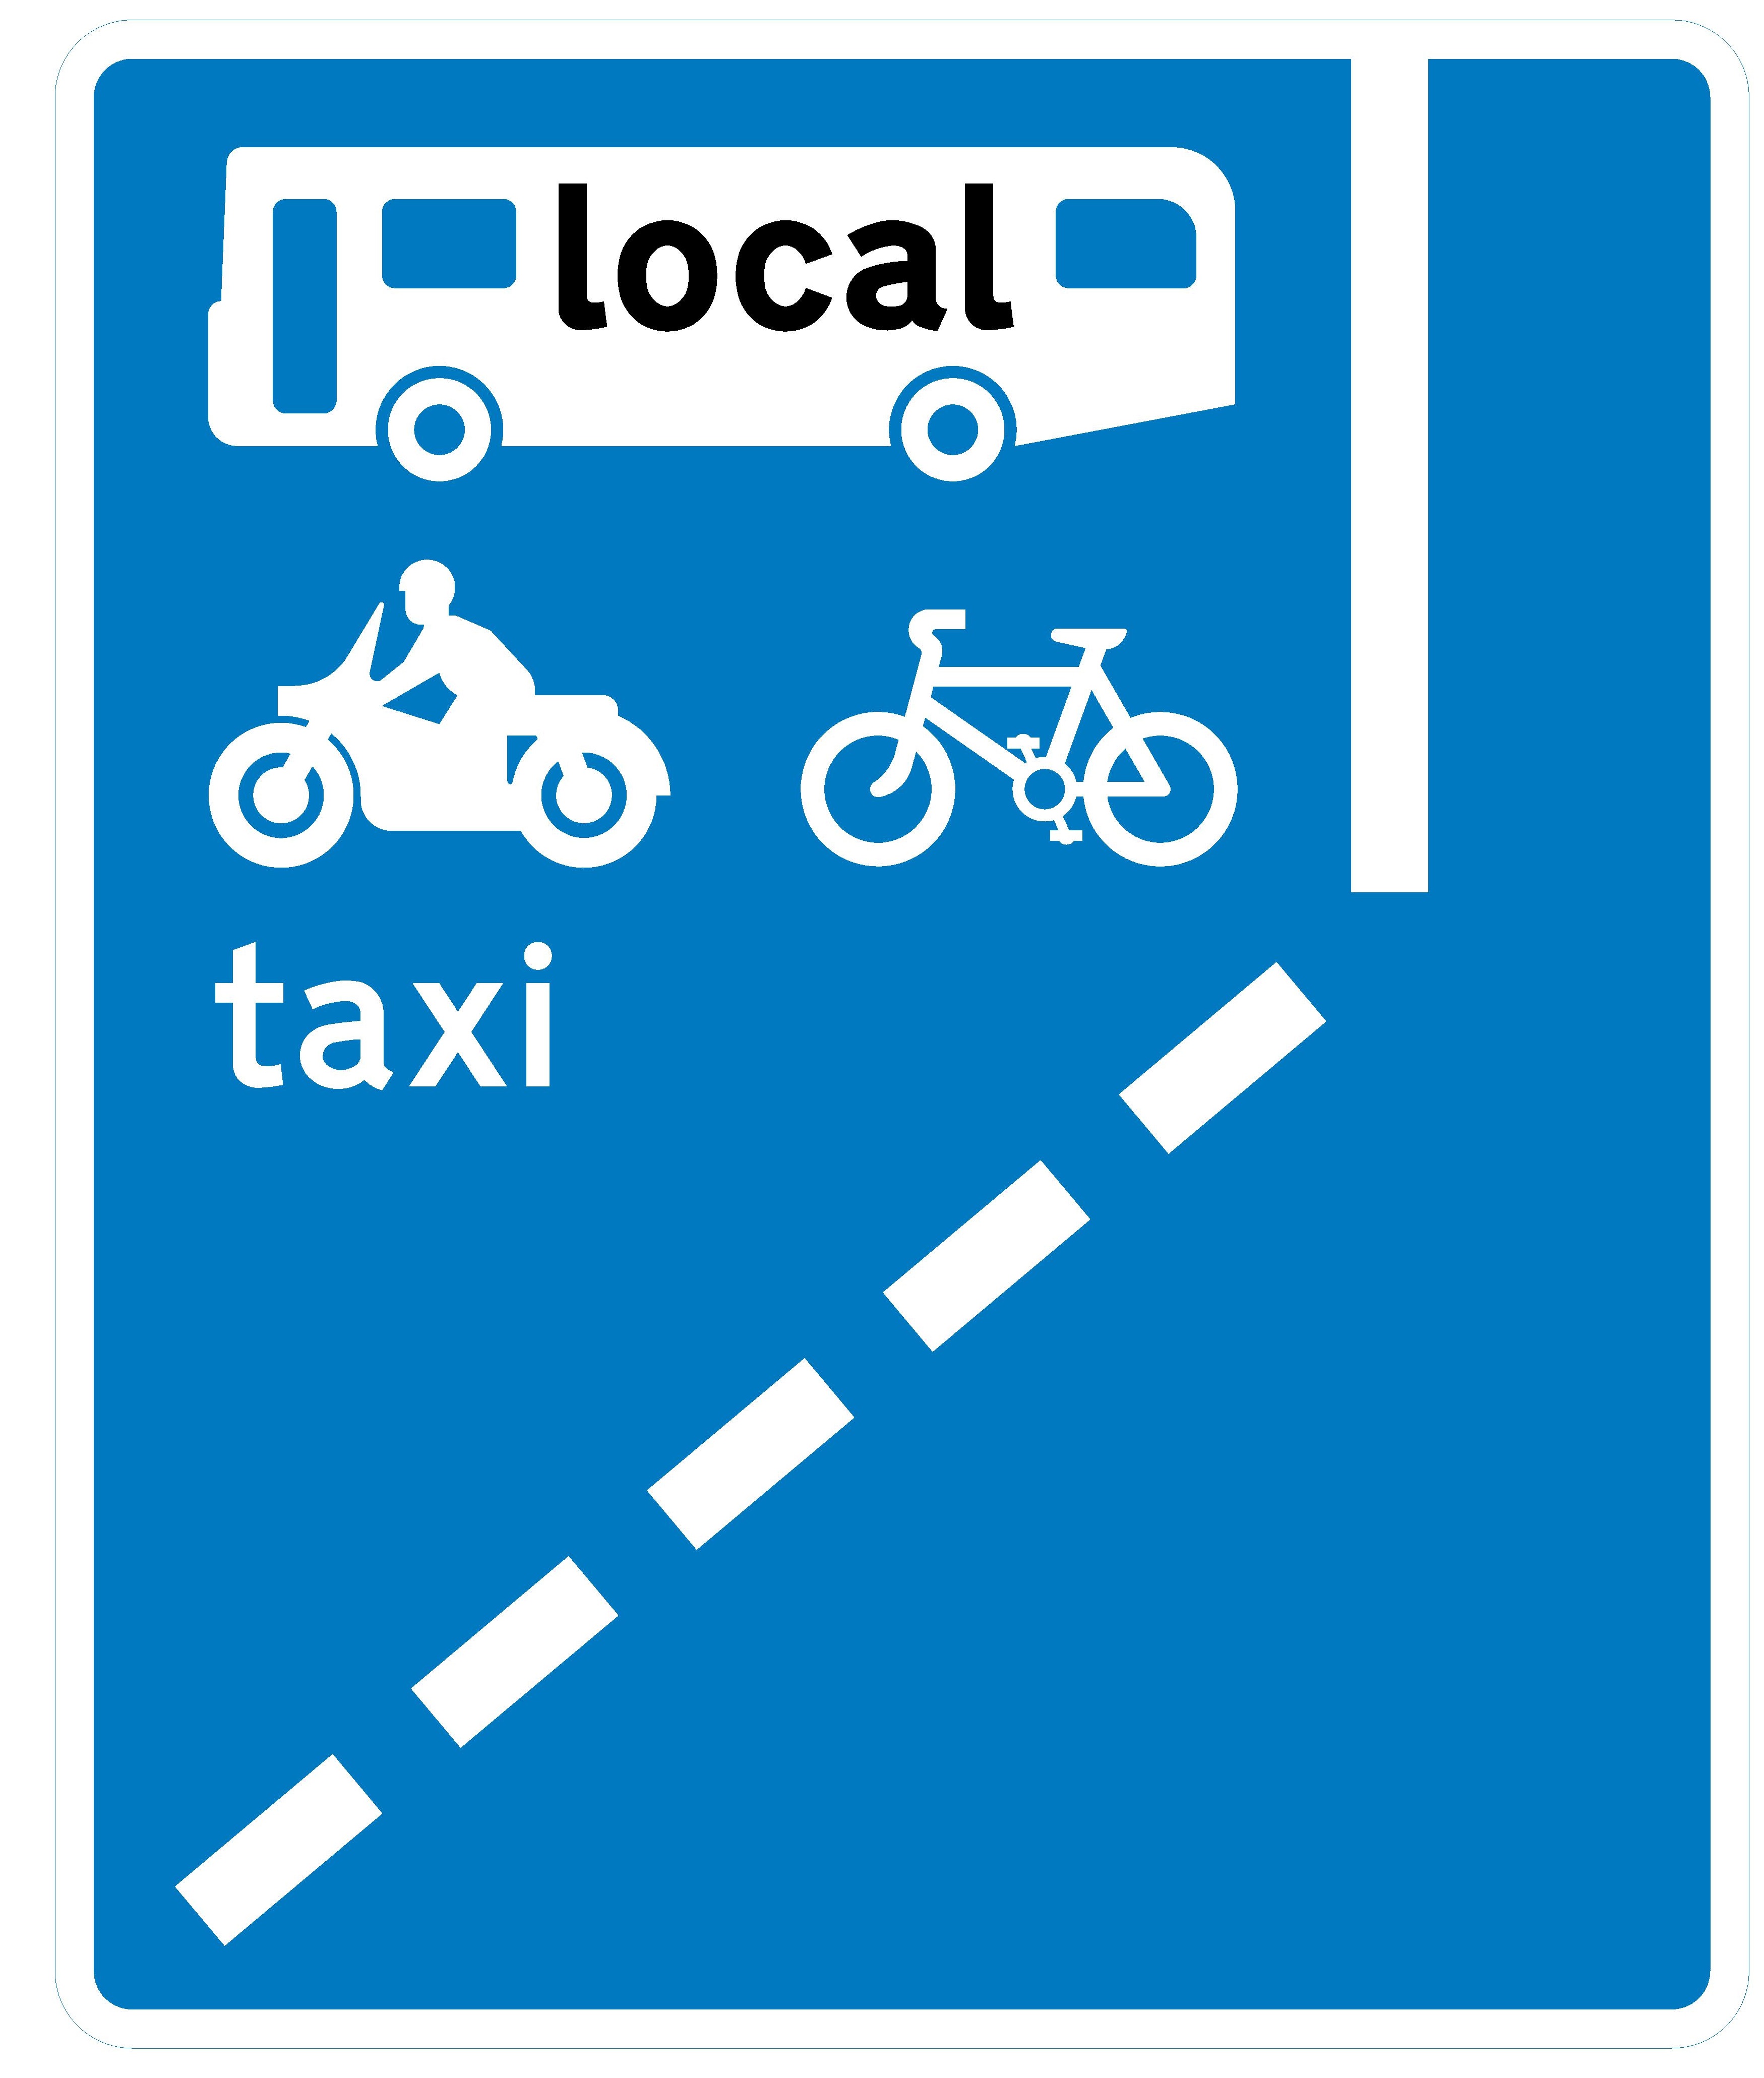 bus lane only sign showing motorcycles included